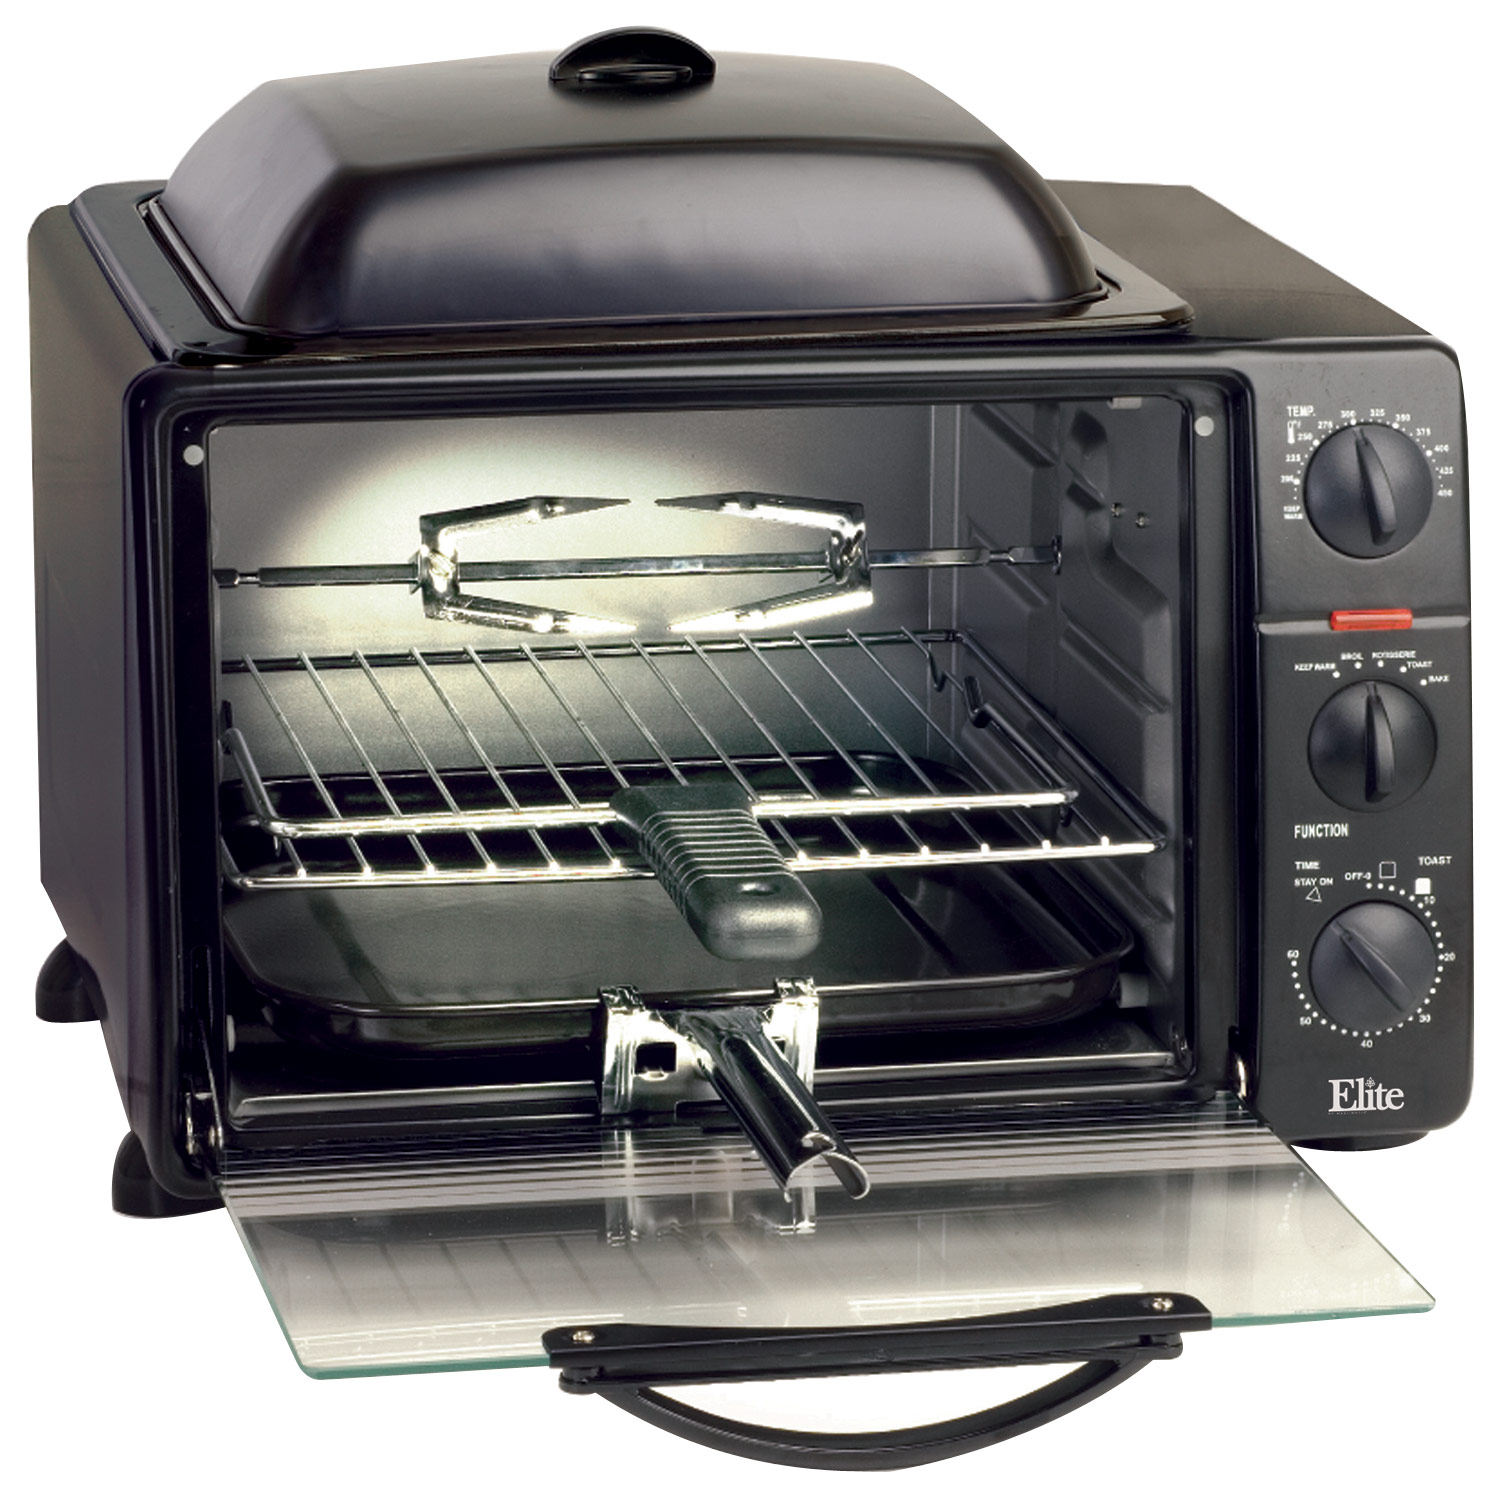 Elite Platinum Toaster Oven with Rotisserie, Convection & Grill/Griddle